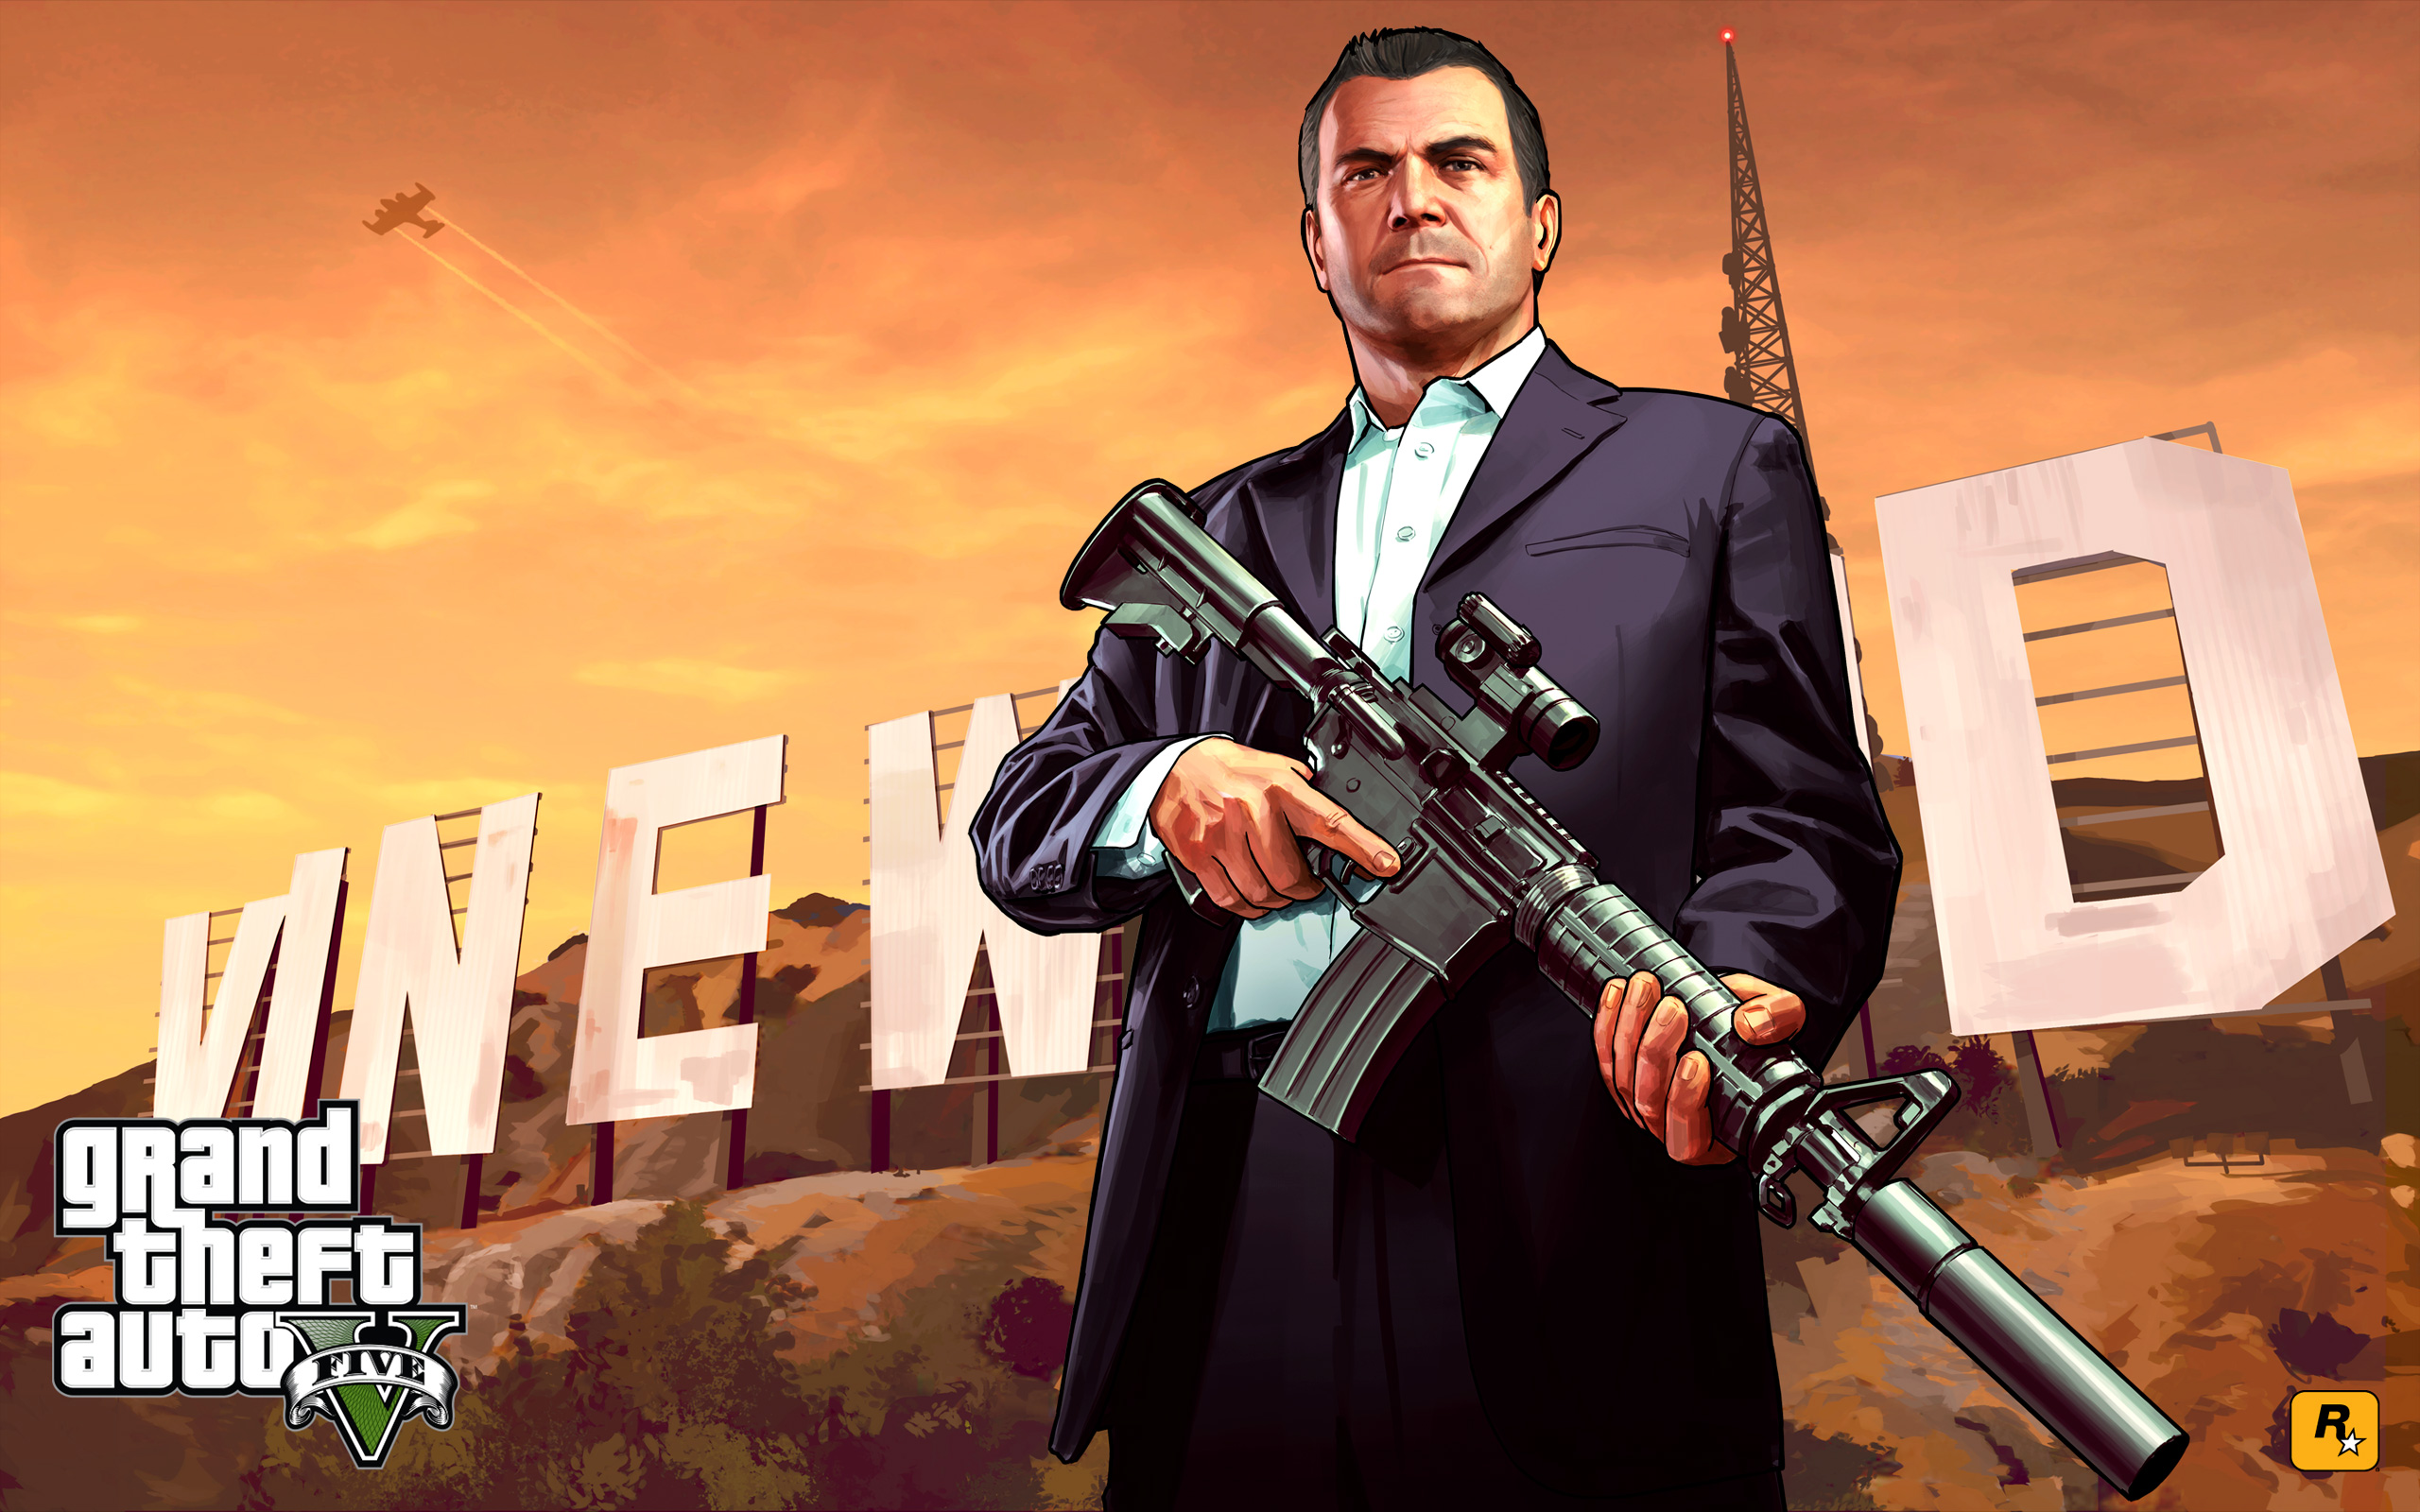 grand theft auto 5 wallpapers